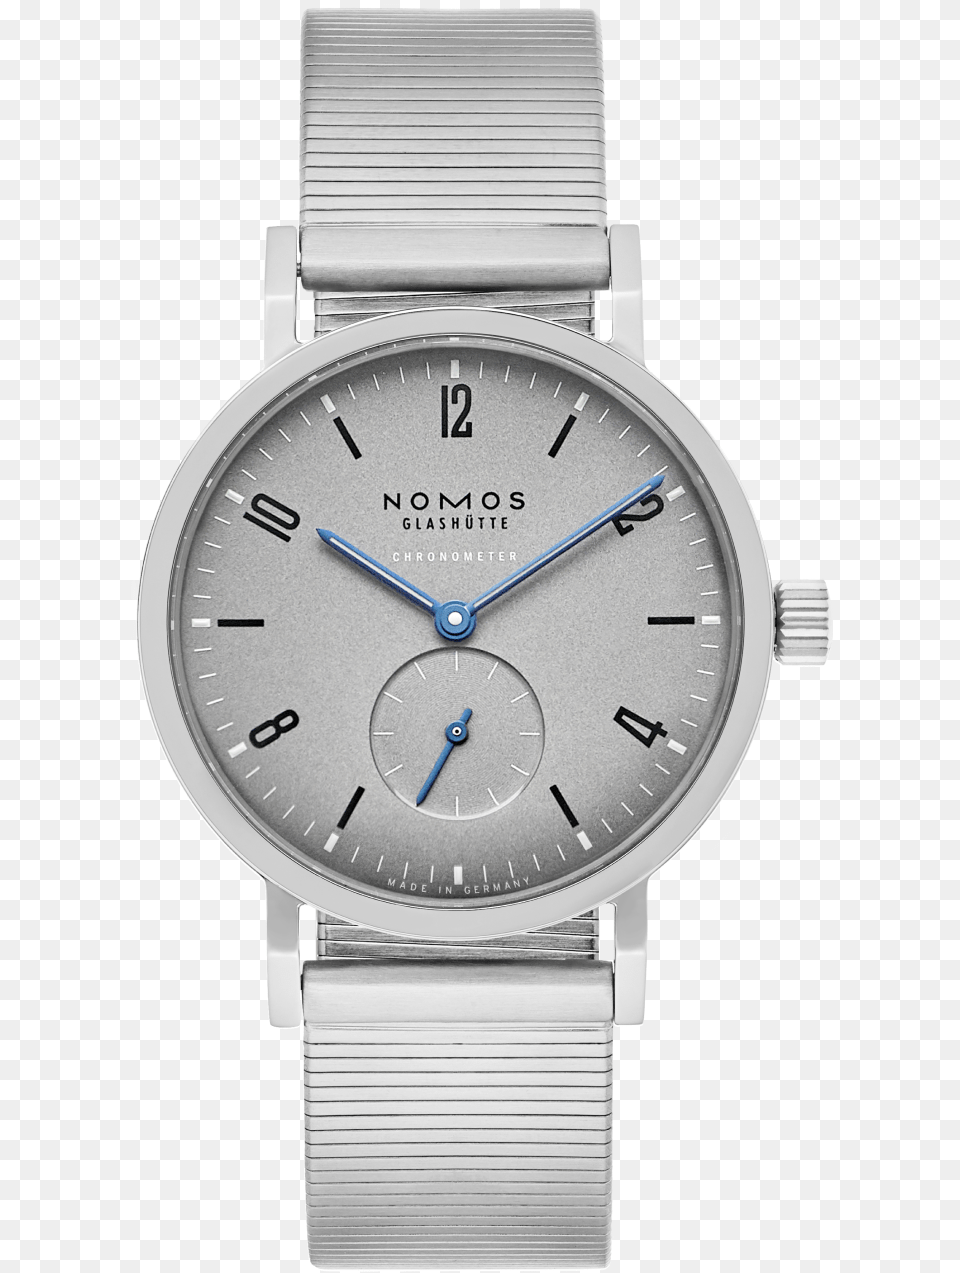 Nomos Hodinkee Limited Edition, Arm, Body Part, Person, Wristwatch Free Transparent Png